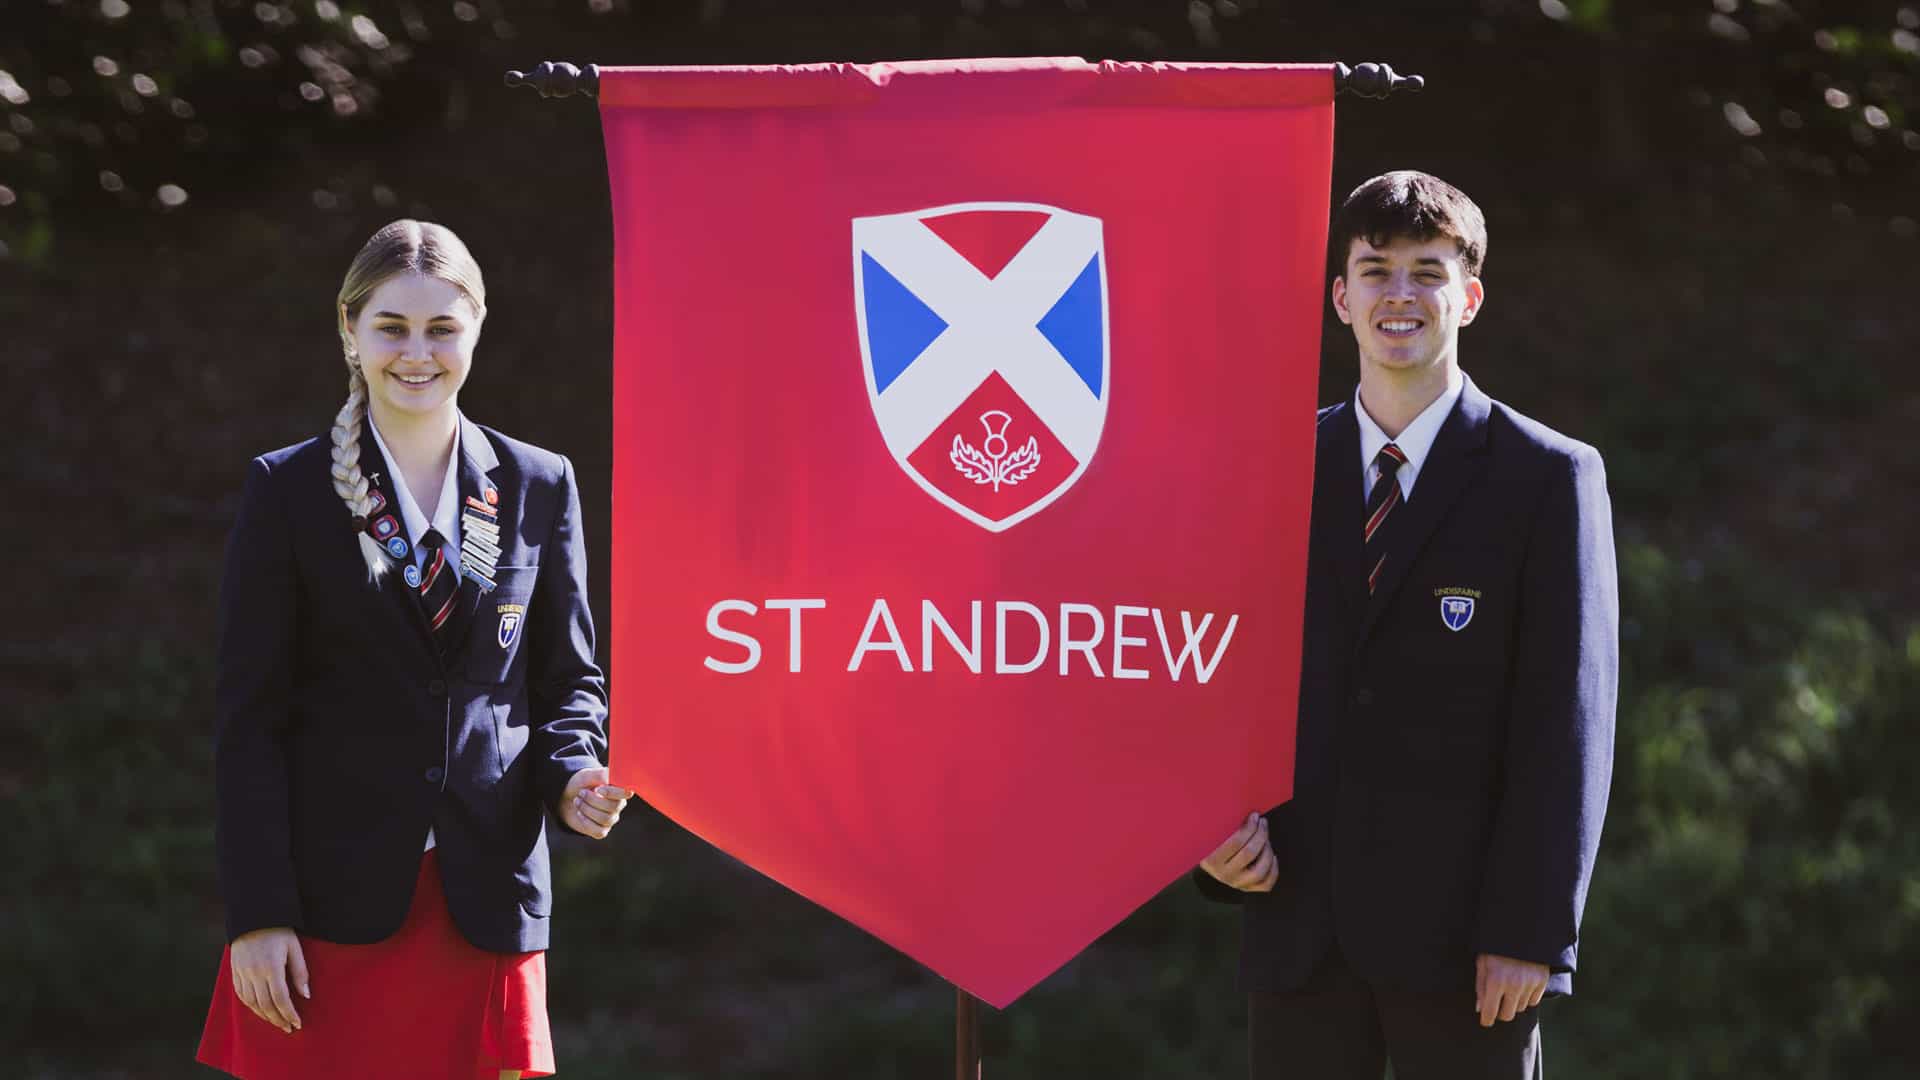 The new St Andrew house banner